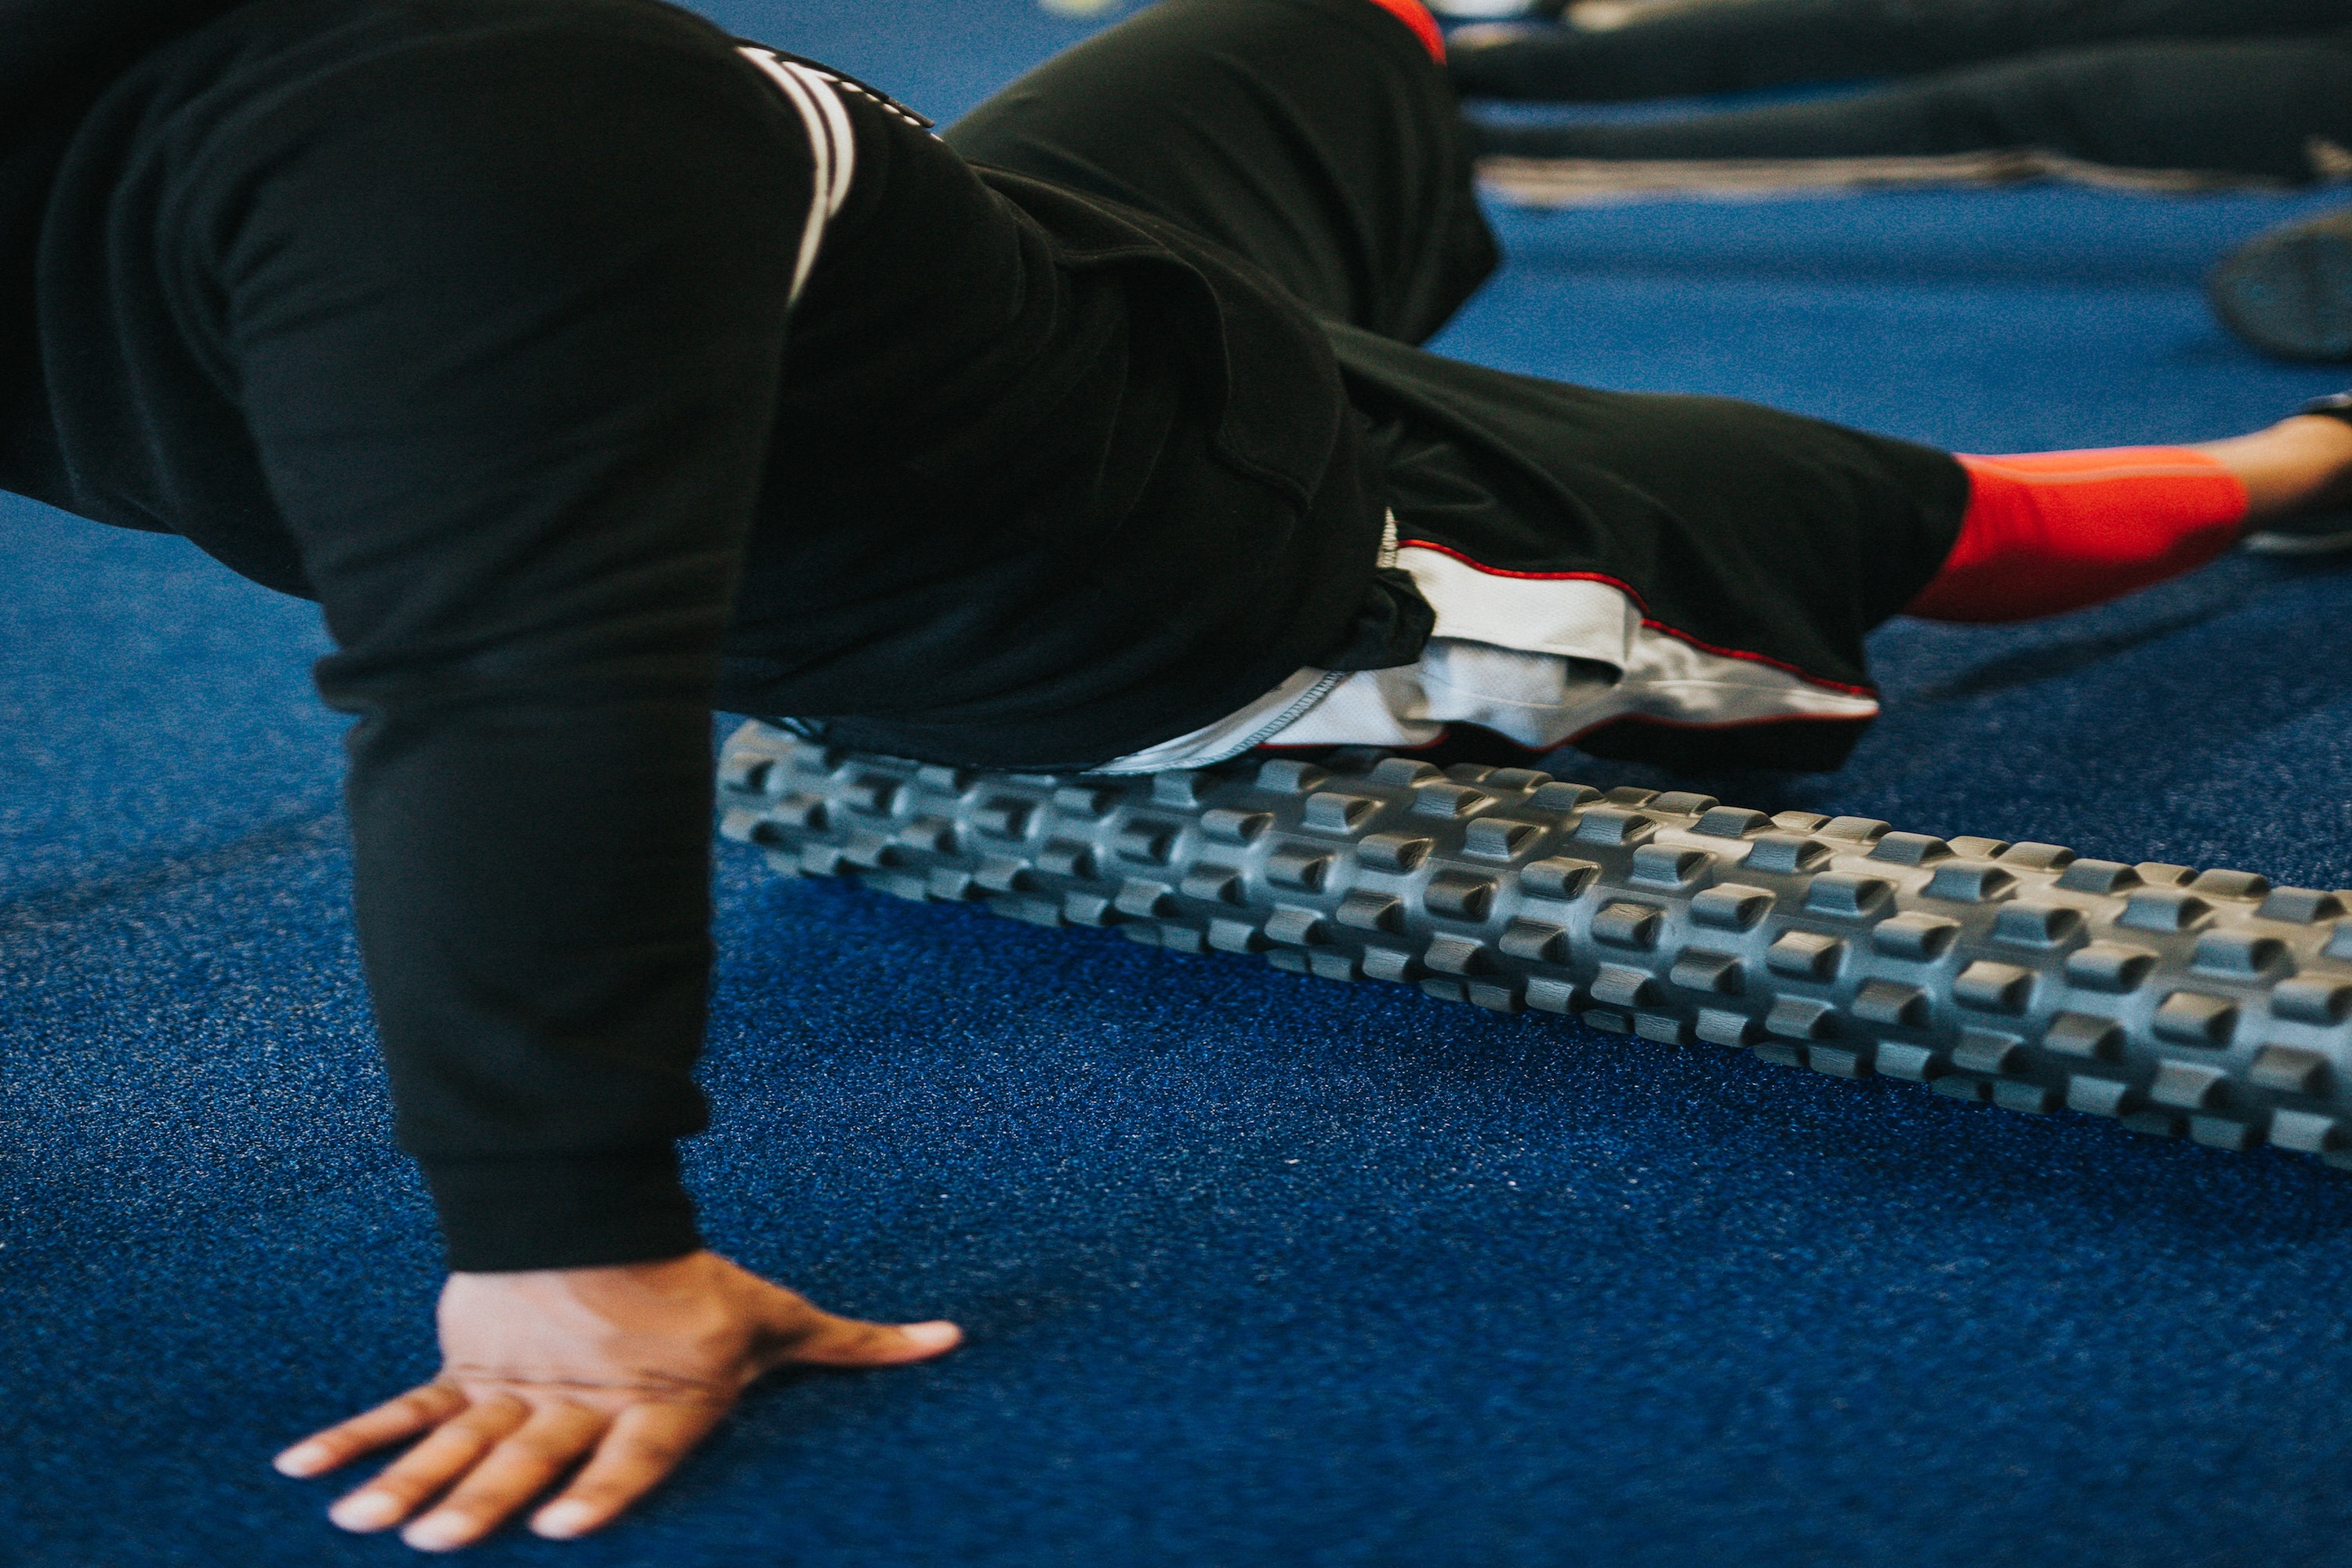 Foam Rolling vs Stretching: What's the Difference? - The Training Room